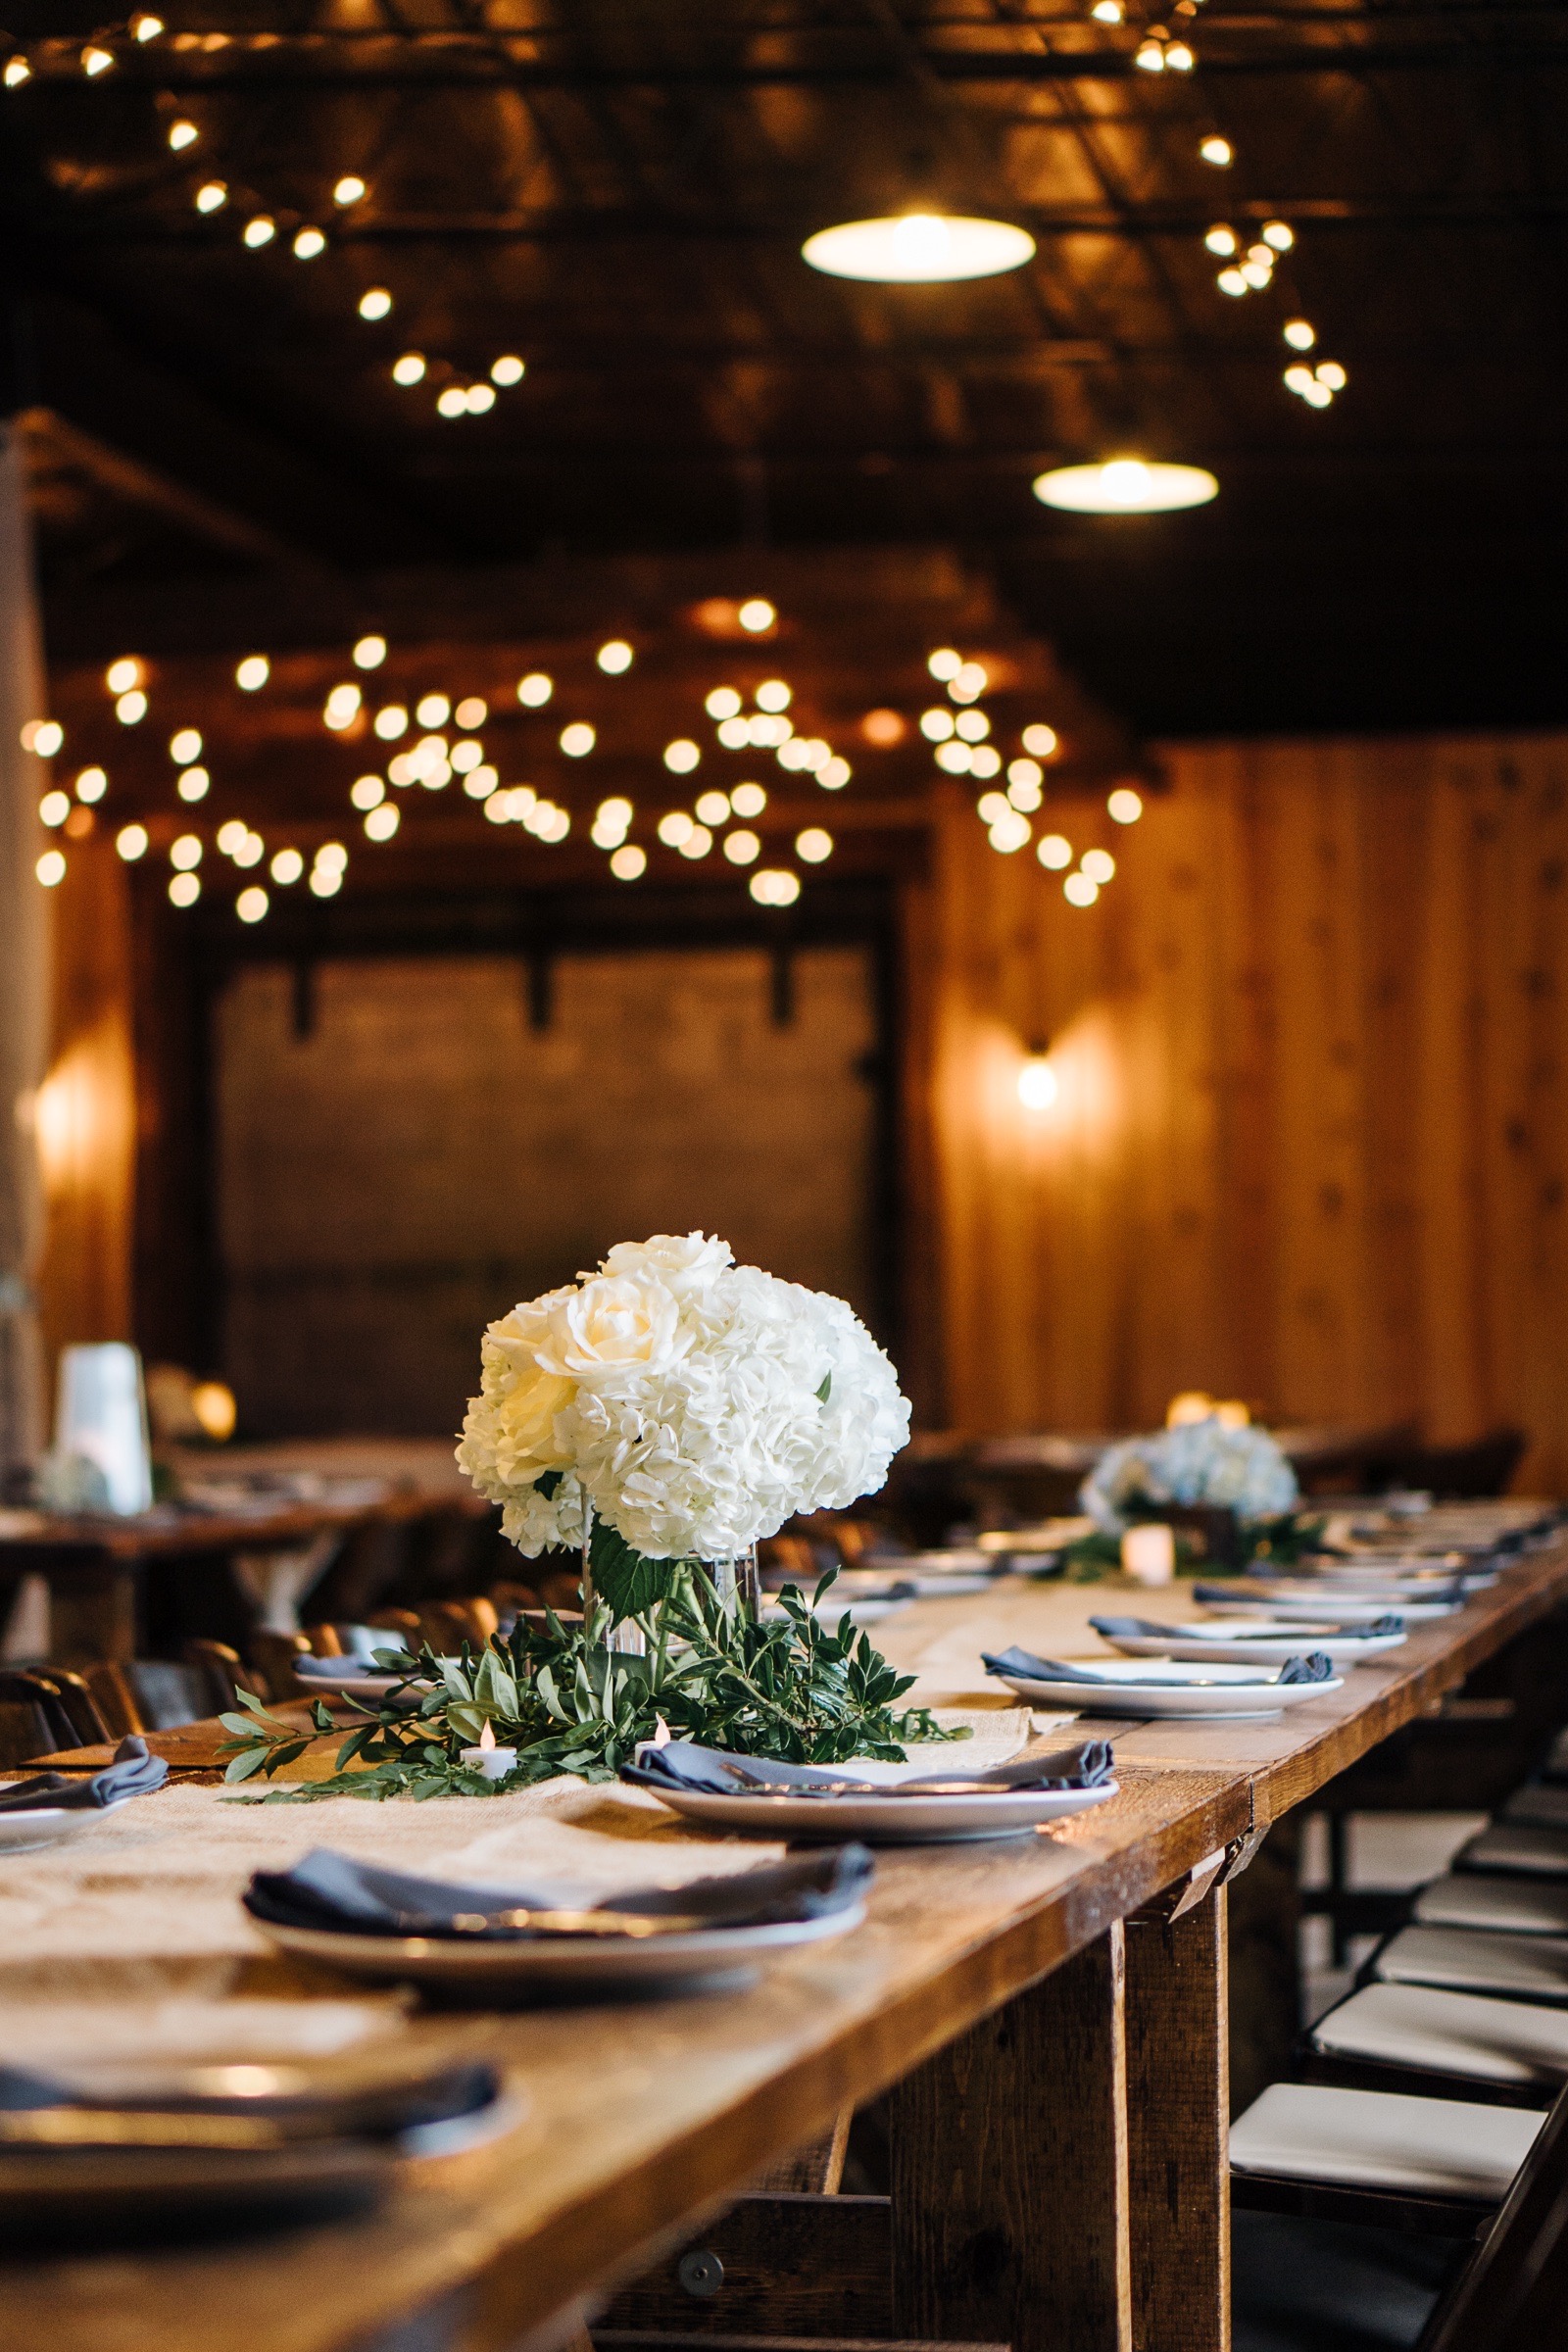 Michael and Abigael Virginia Warehouse Industrial Boho Wedding in Blue and Ivory by Jonathan Hannah Photography-15.jpg